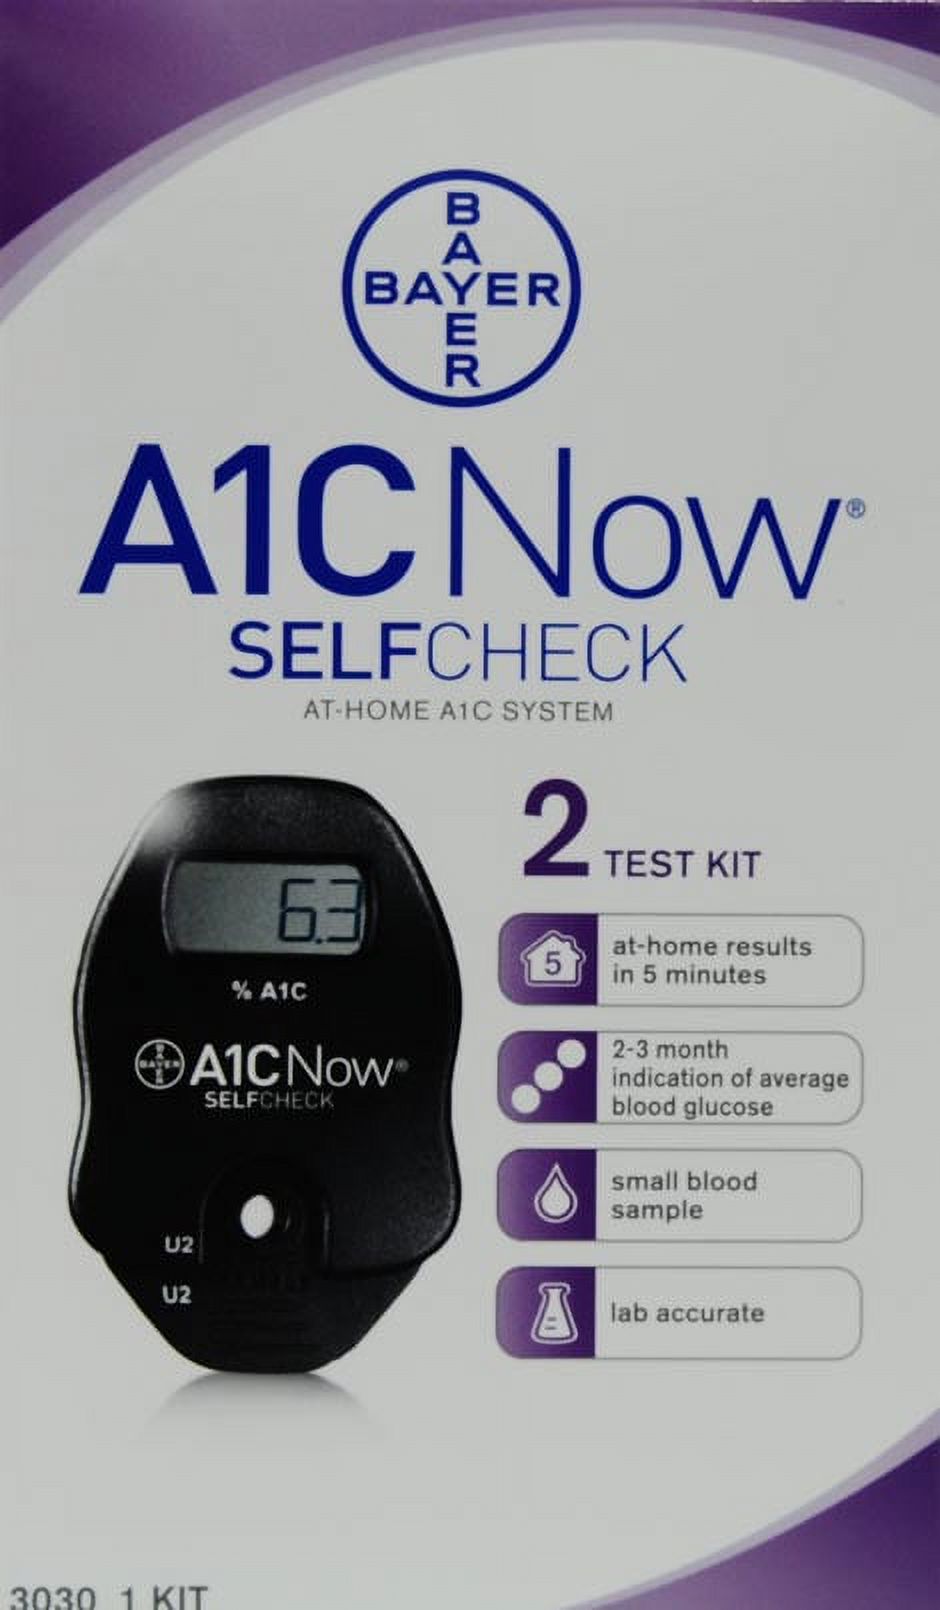 A1CNOW Self Check (2 Count Test) - image 2 of 4